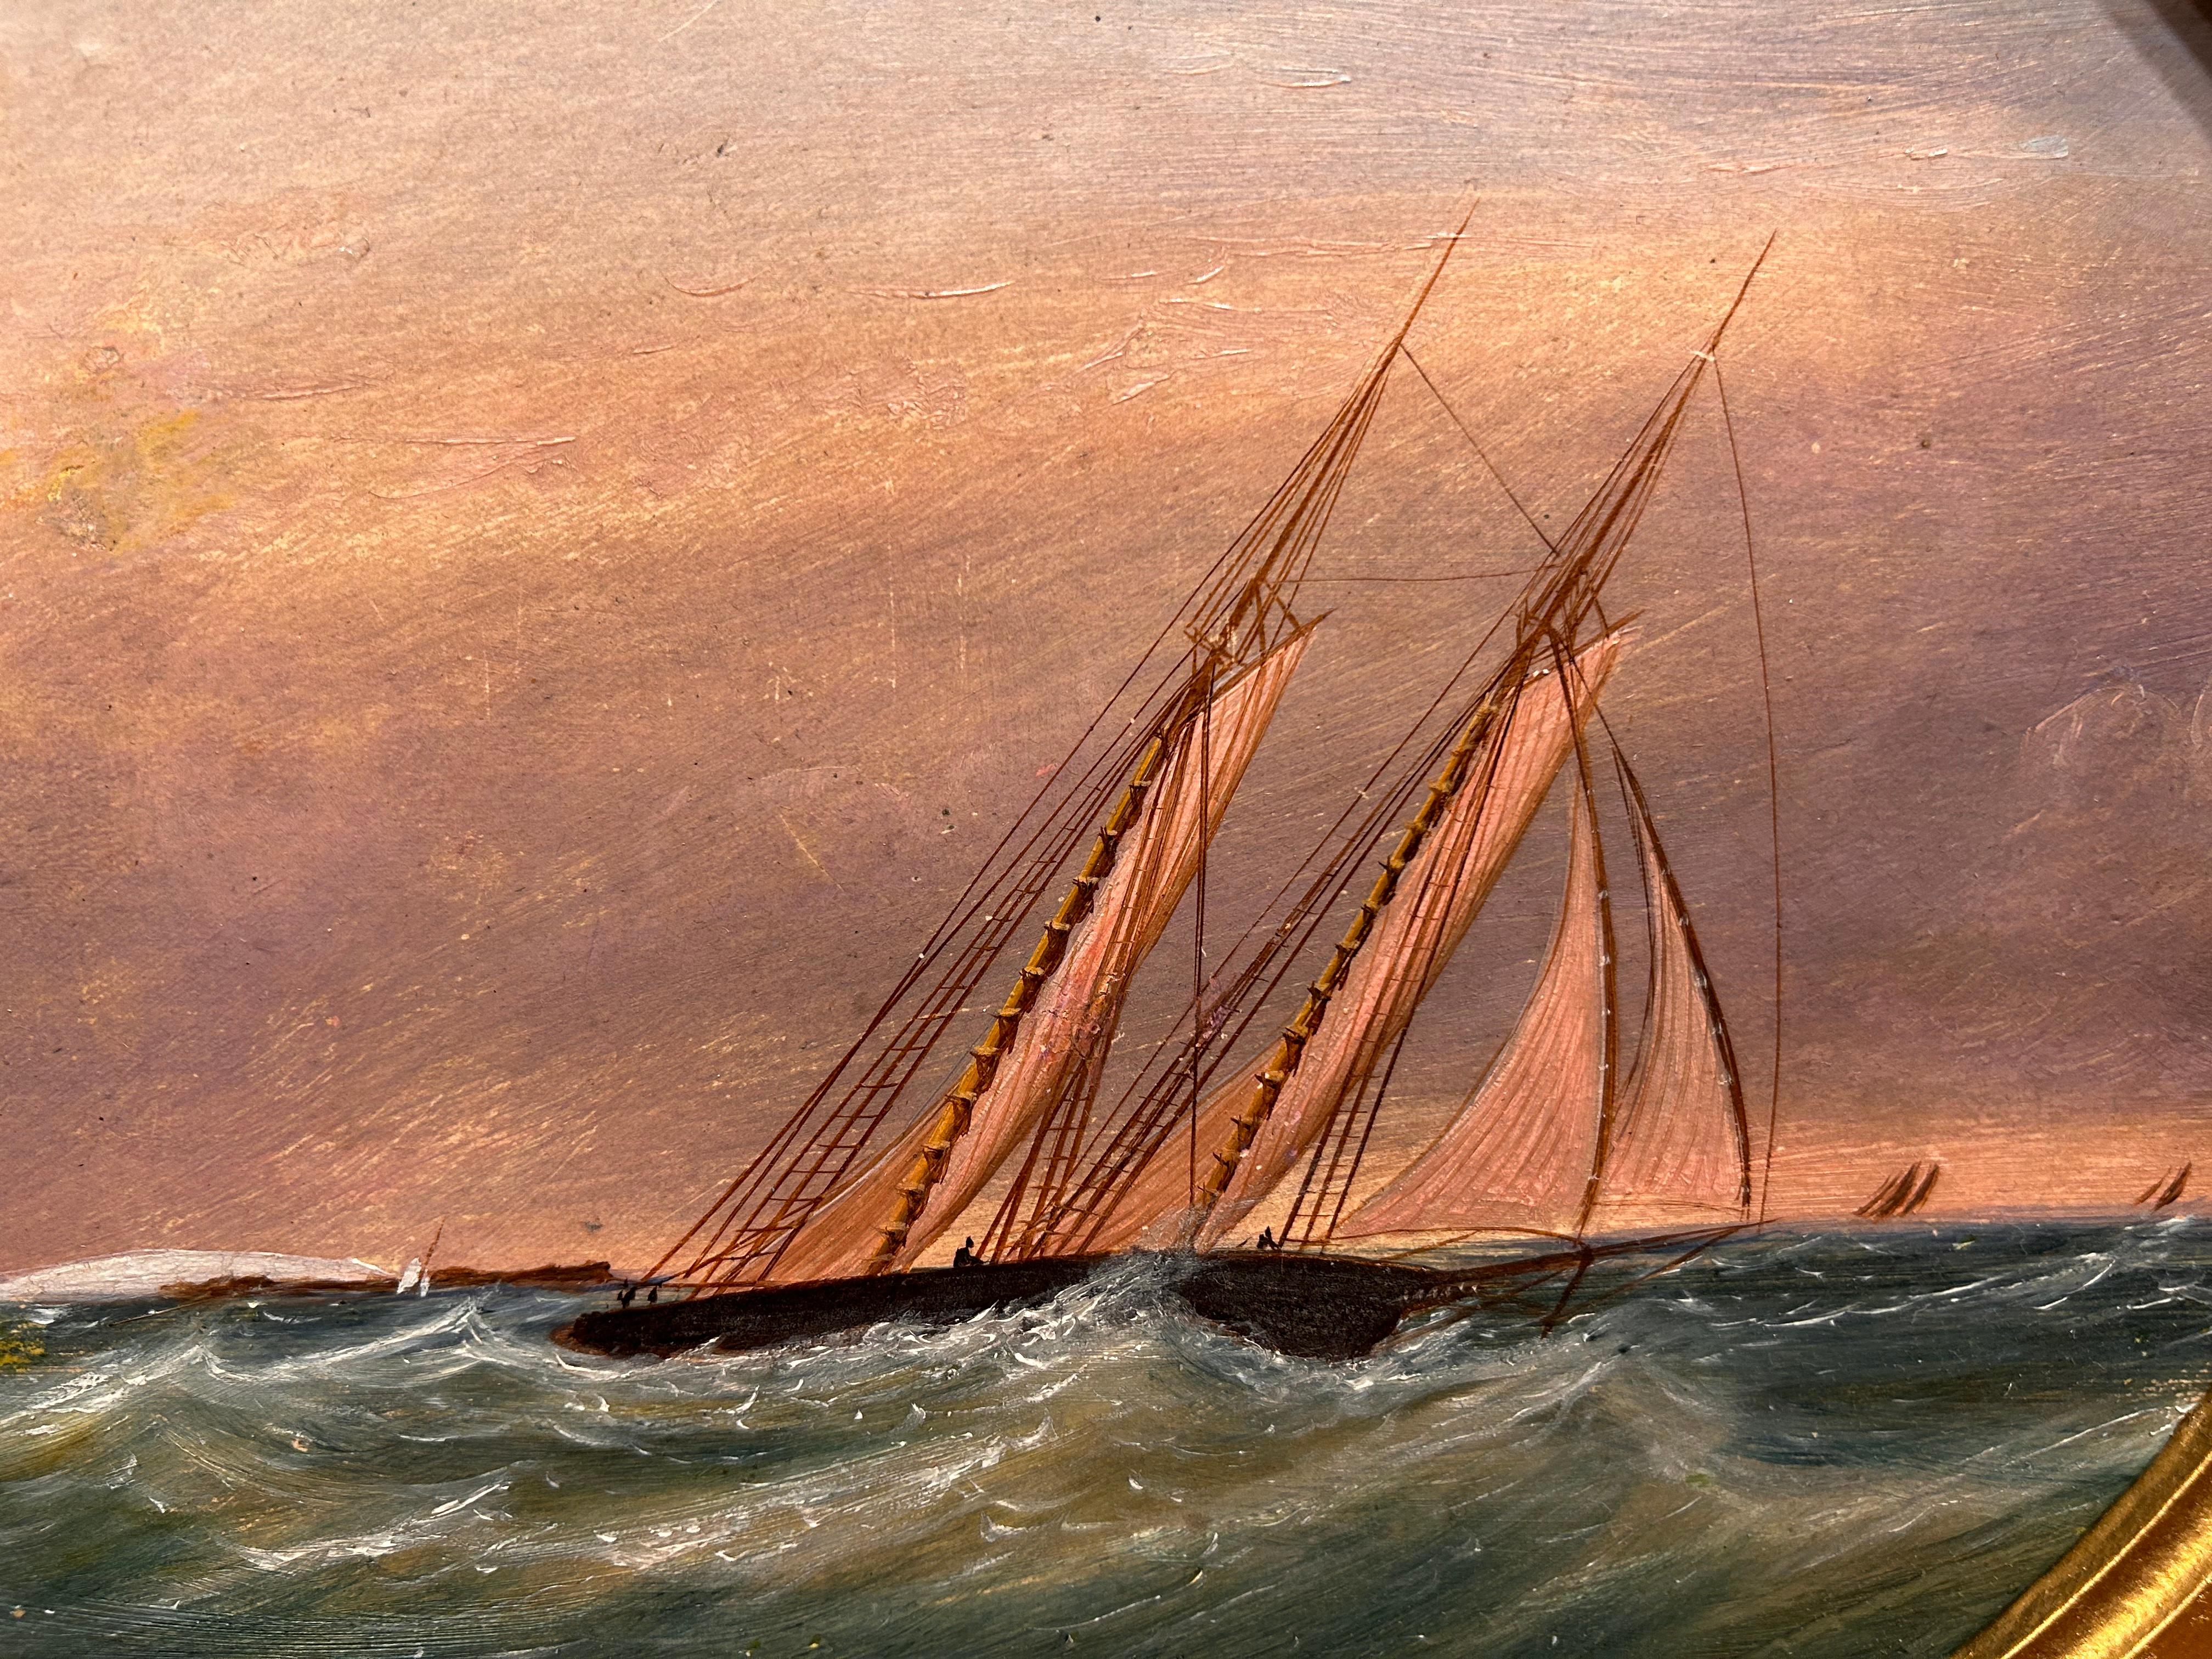 Clement Drew grew up in Kingston, Massachusetts, a coastal New England town. Early on he settled into a career as a marine painter. He augmented his income by working in a number of jobs including dry goods, a library and even operating an artist